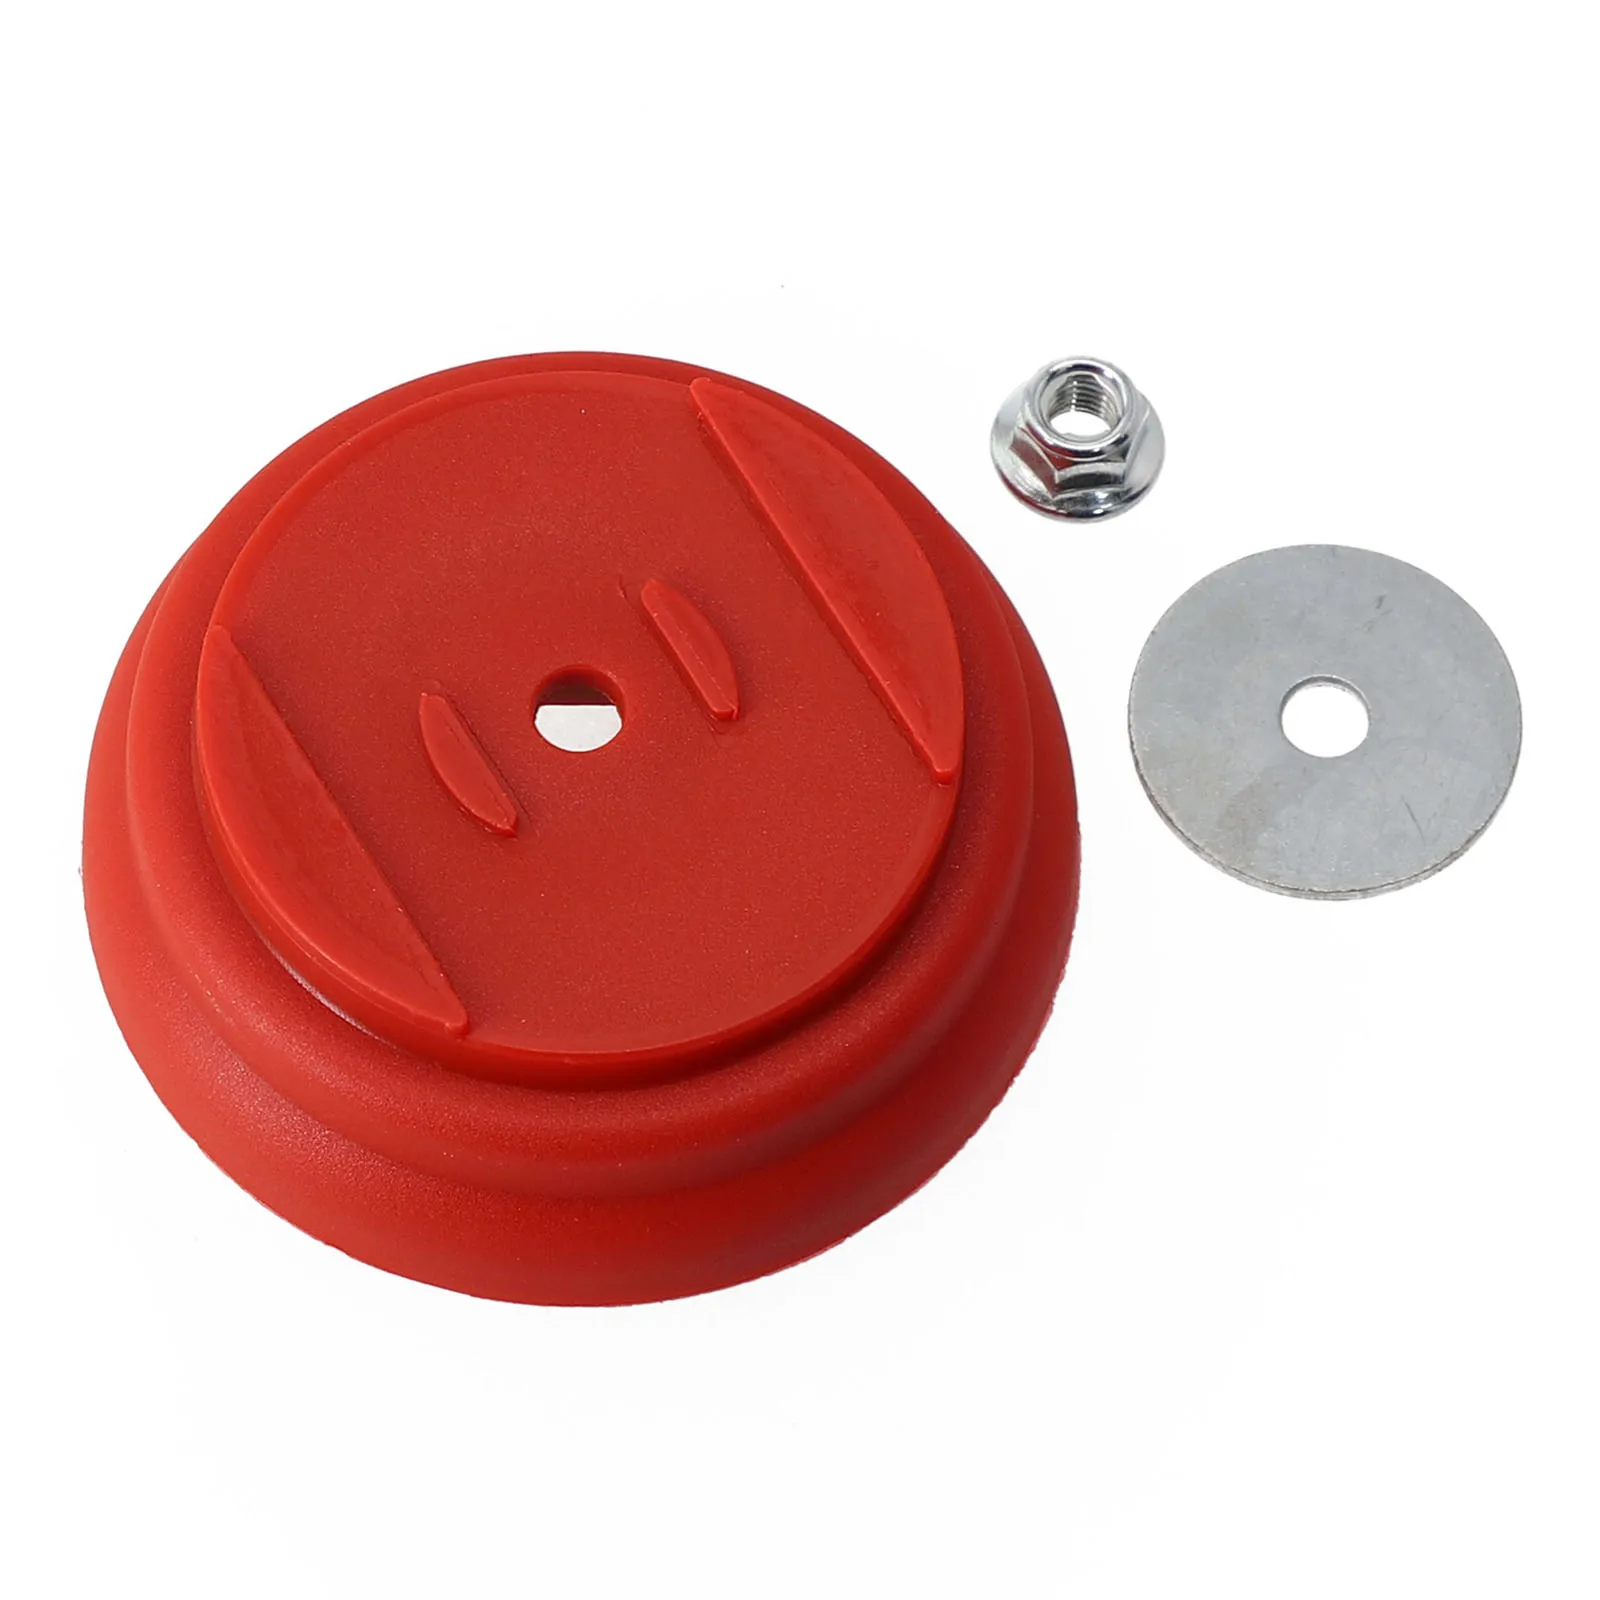 

Protective Gasket Plastic Cover 3pcs Accessory Attachment Disassembled Garden Nut Plastic Cover Replace Brand New